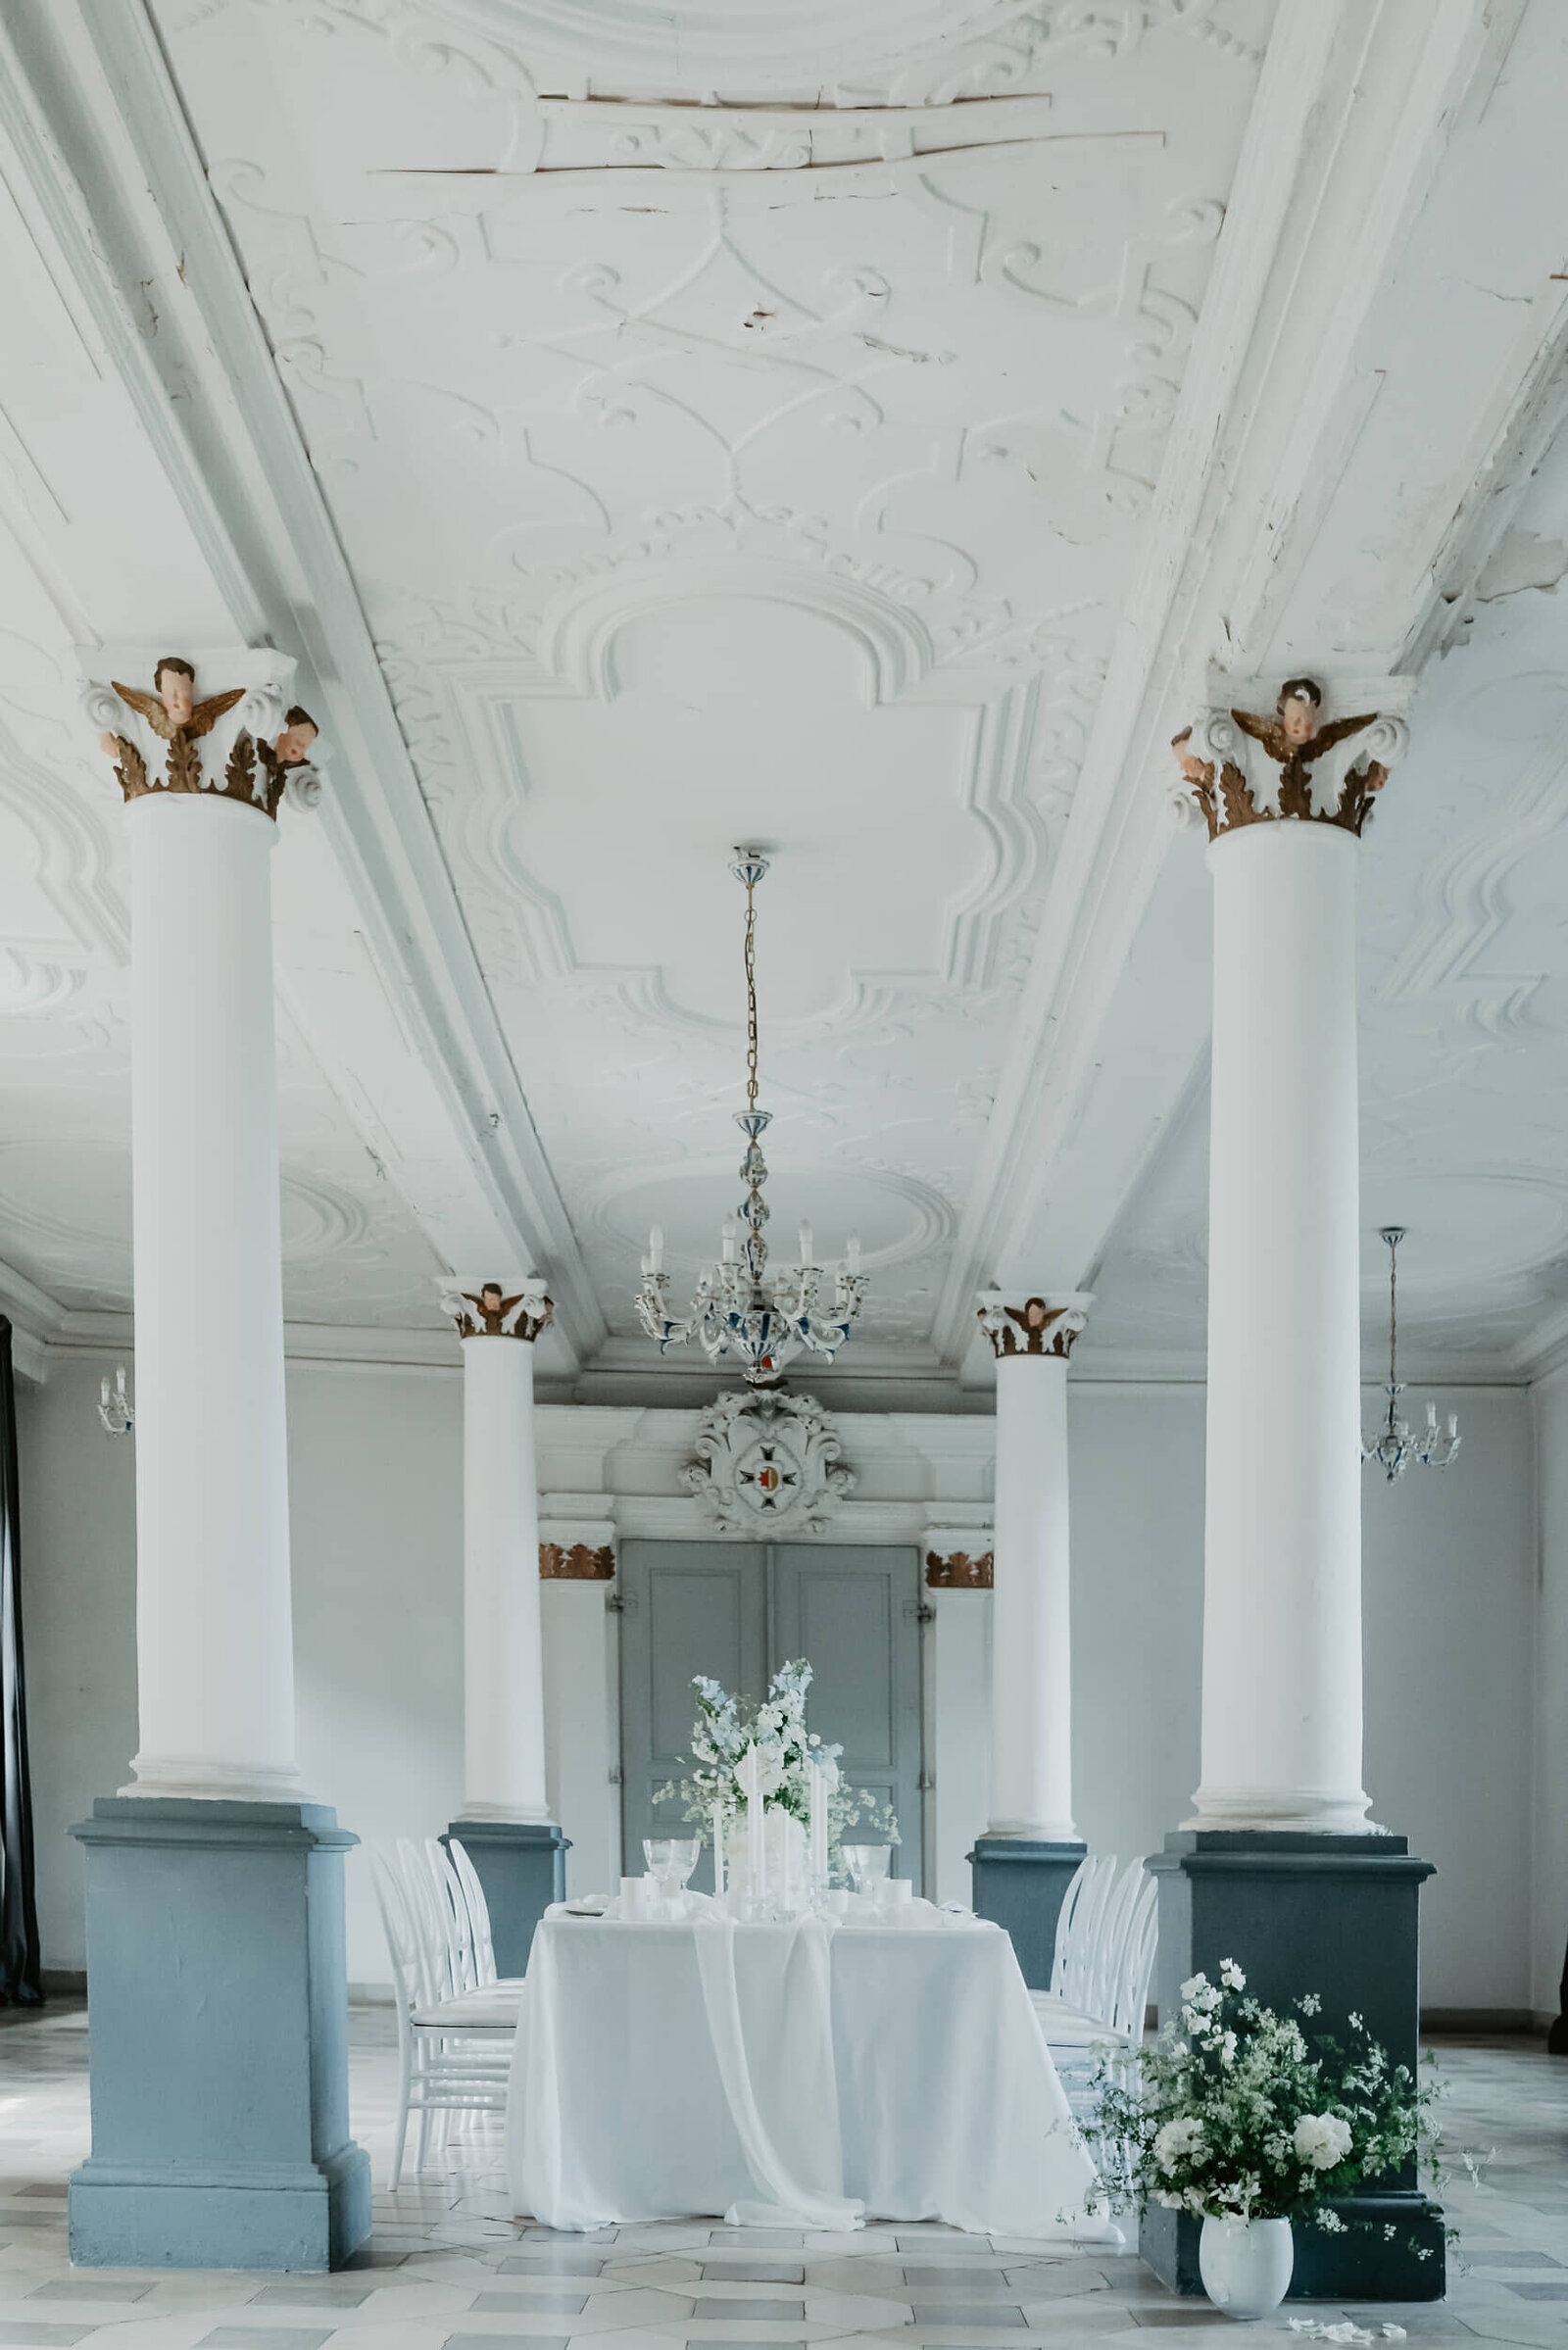 Destination Wedding in Germany wedding inspiration "Poetry of clouds" at Schloss Virnsberg - by wedding photographer SELENE ADORES-322